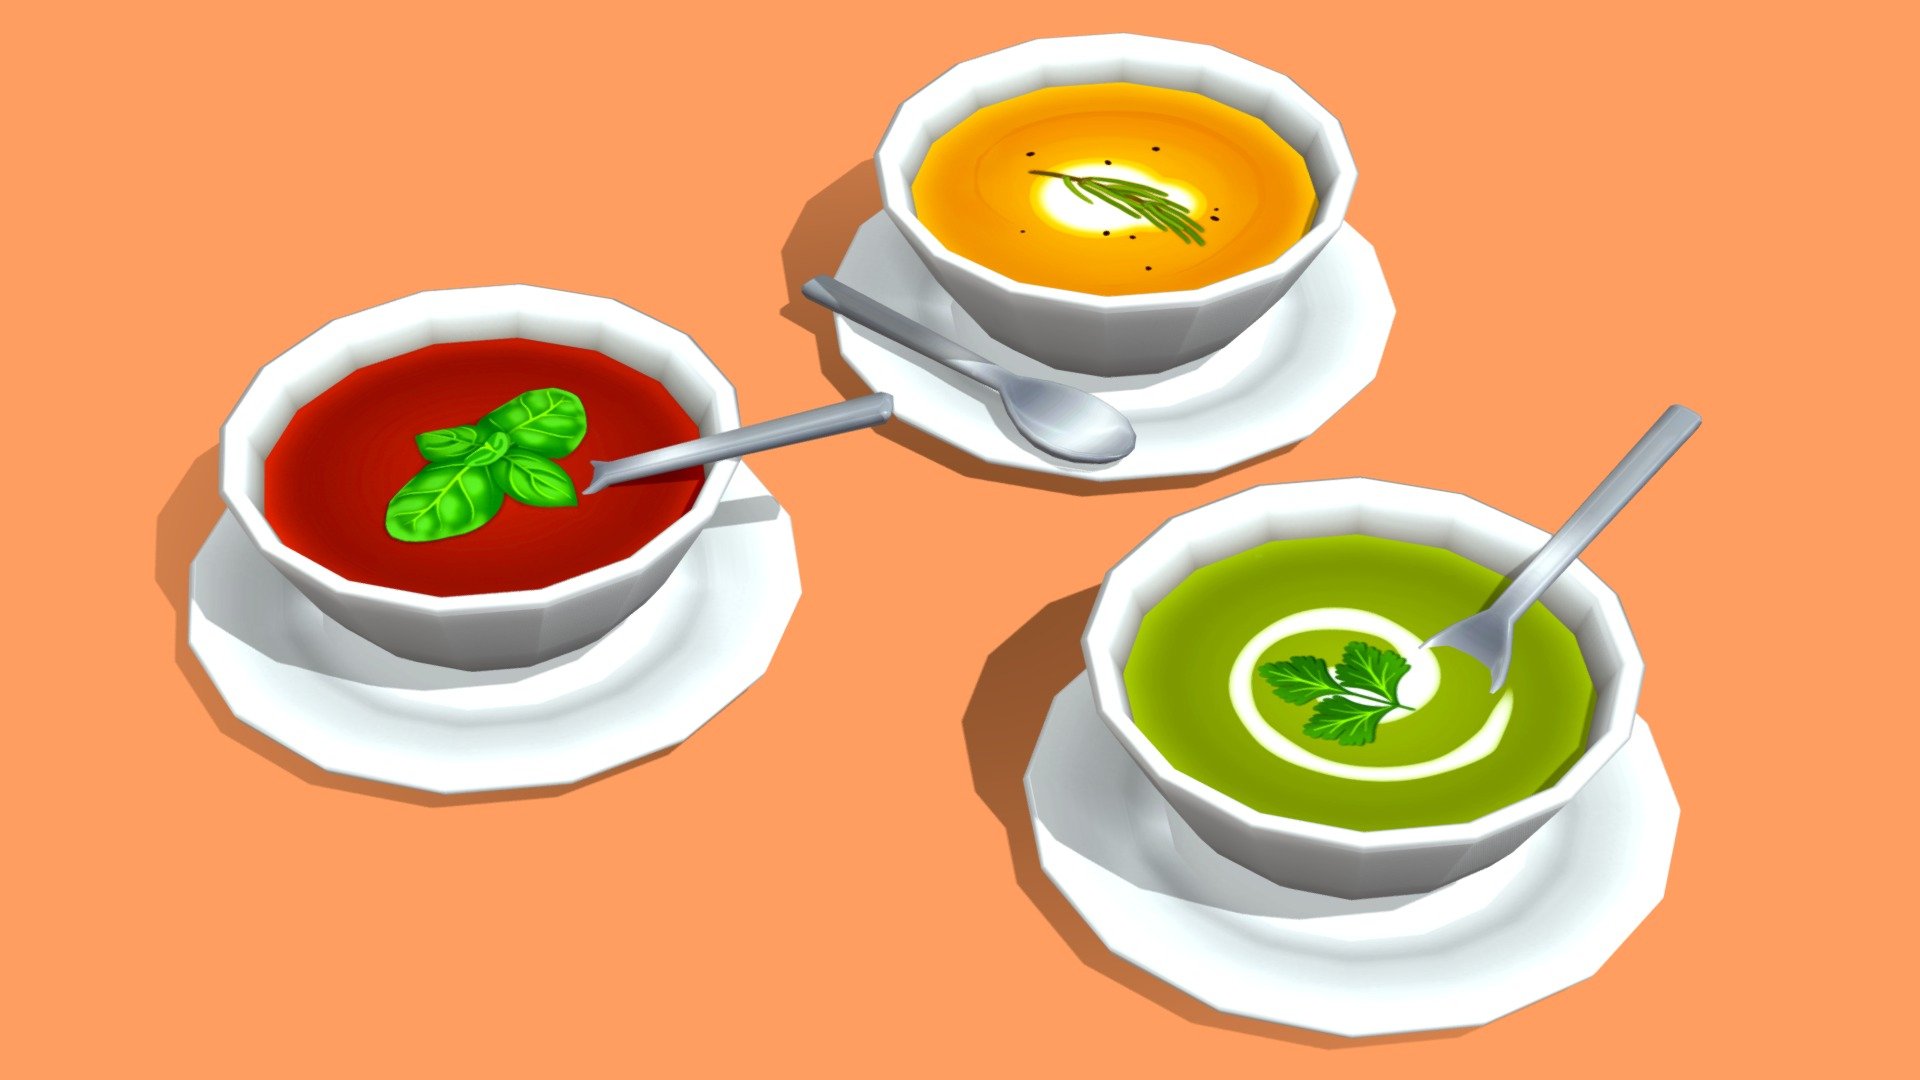 Three healthy, low-poly soups for your next cafe!




Tomato, pumpkin and vegetable soup with plates and spoons included

This asset uses 1024x1024 diffuse texture maps and can be used both lit and unlit - perfect for mobile!

Modeled in Maya and painted in Photoshop.

While you’re here make sure to check out my other assets! Every asset is modeled and painted in the same style so your game or project will maintain a cohesive and unique style with a wide variety of assets to choose from! - Soups - Buy Royalty Free 3D model by Megan Alcock (@citystreetlight) 3d model